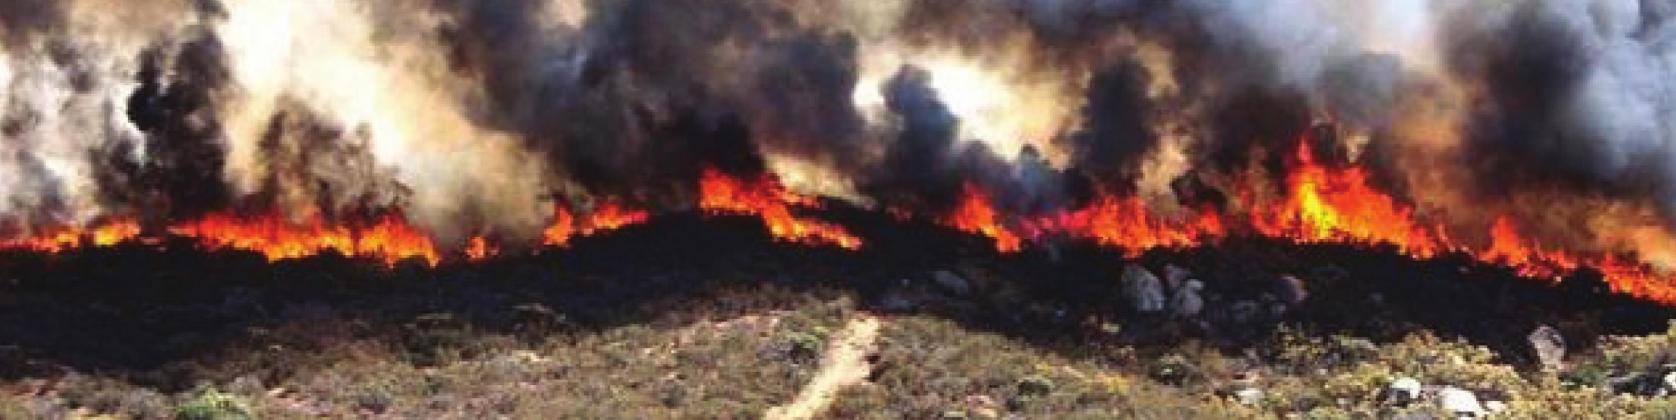 Wildfire danger increases